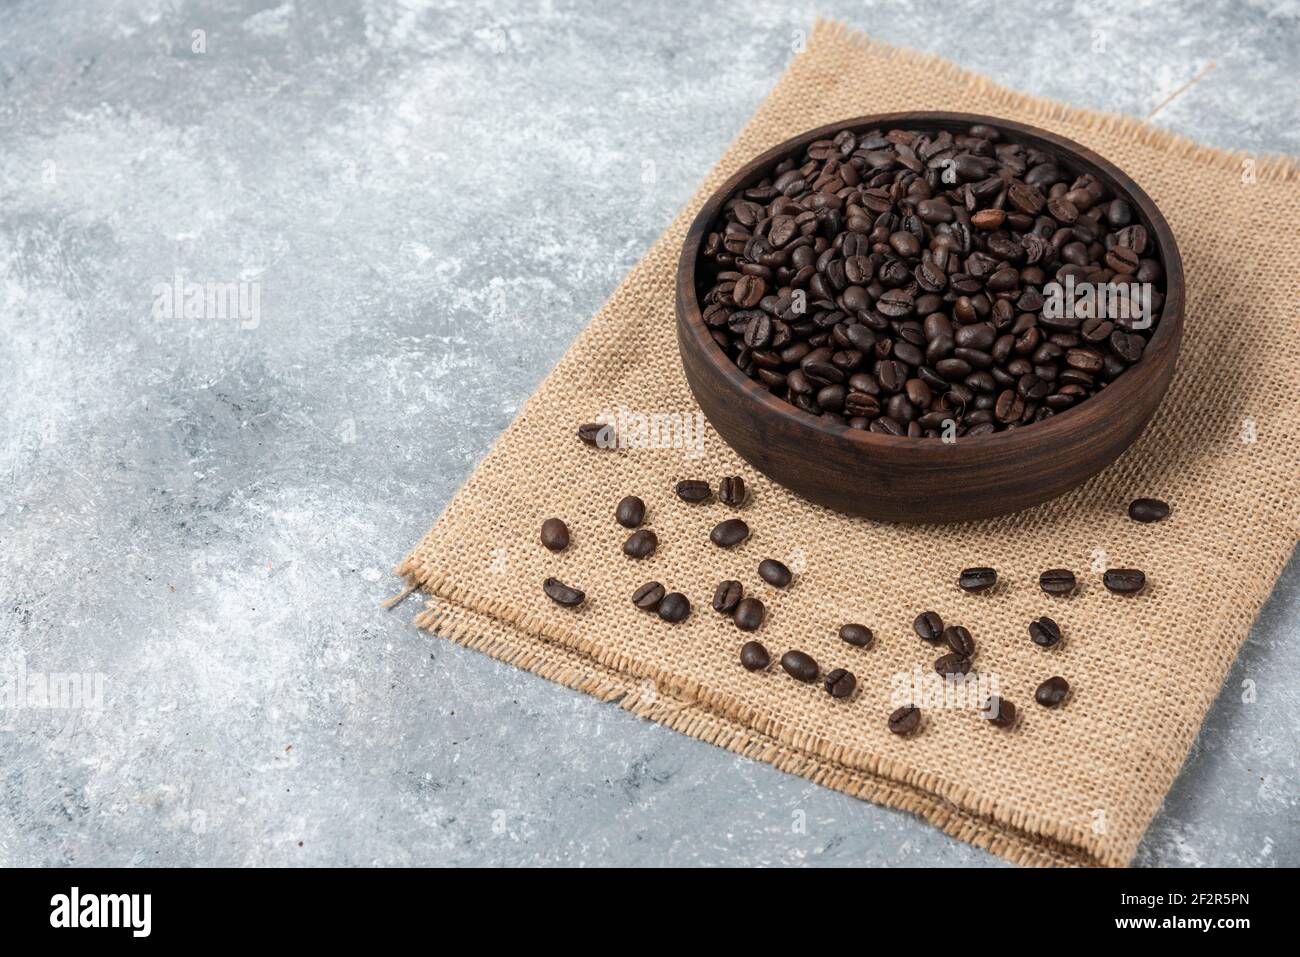 Wooden bowl of dark roasted coffee beans and burlap on marble surface Stock Photo